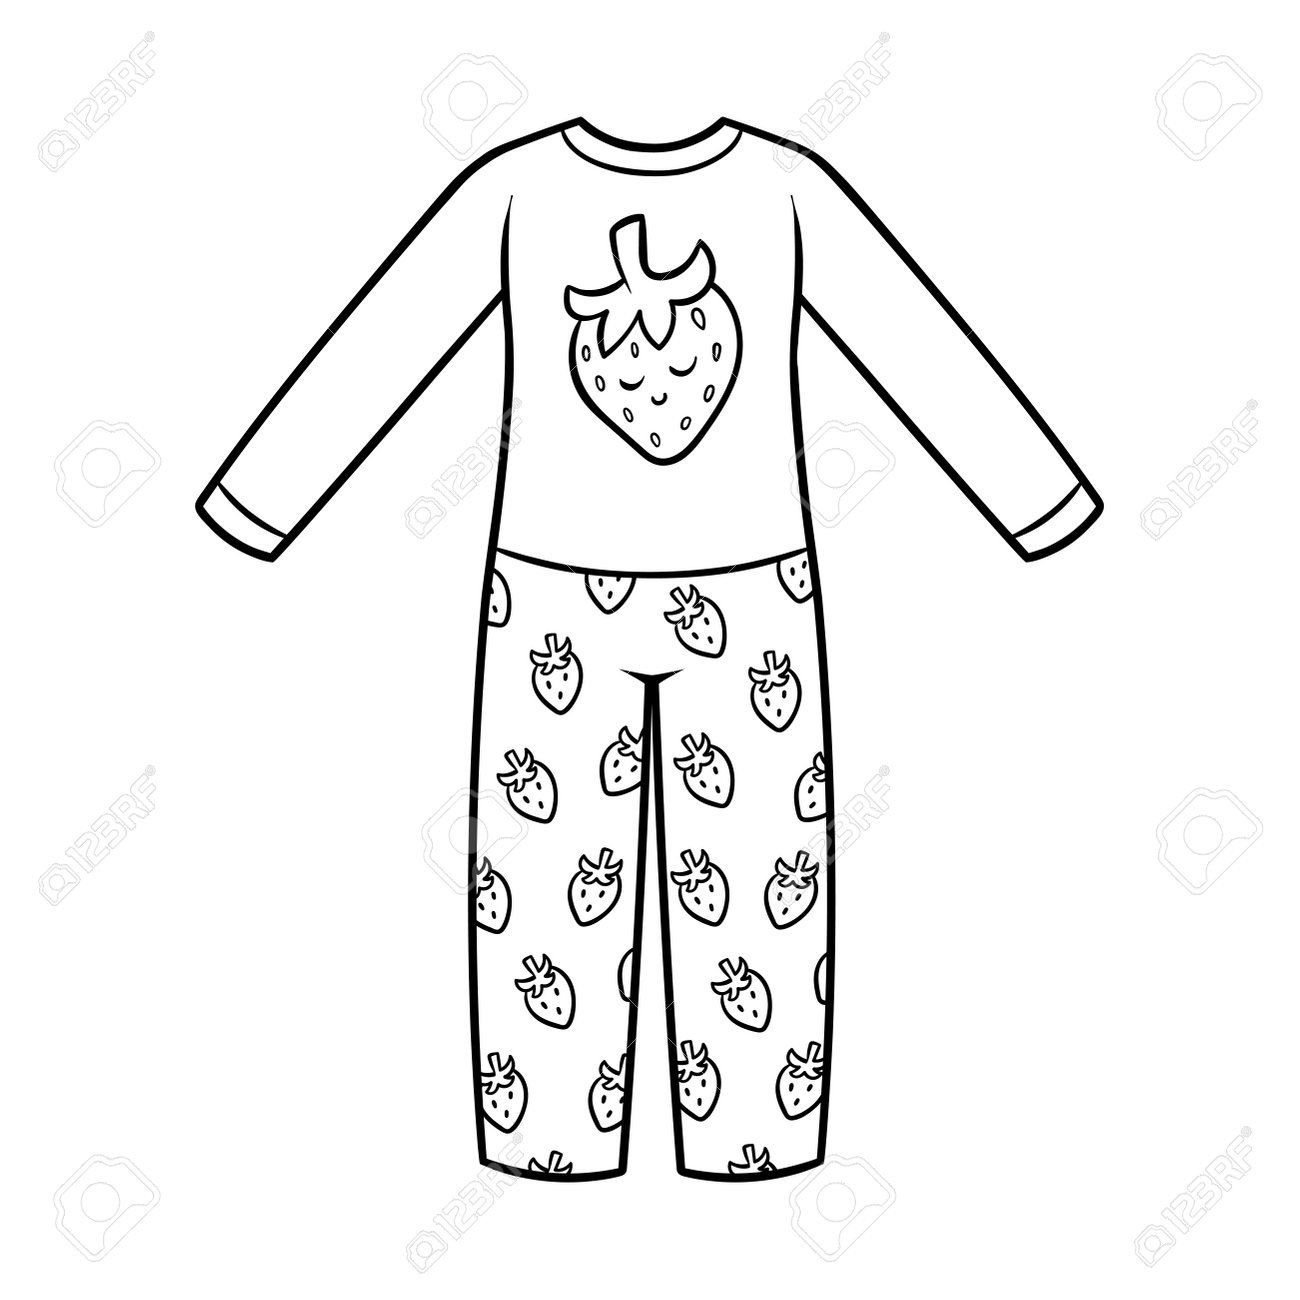 Coloring book for children pajamas for girls royalty free svg cliparts vectors and stock illustration image